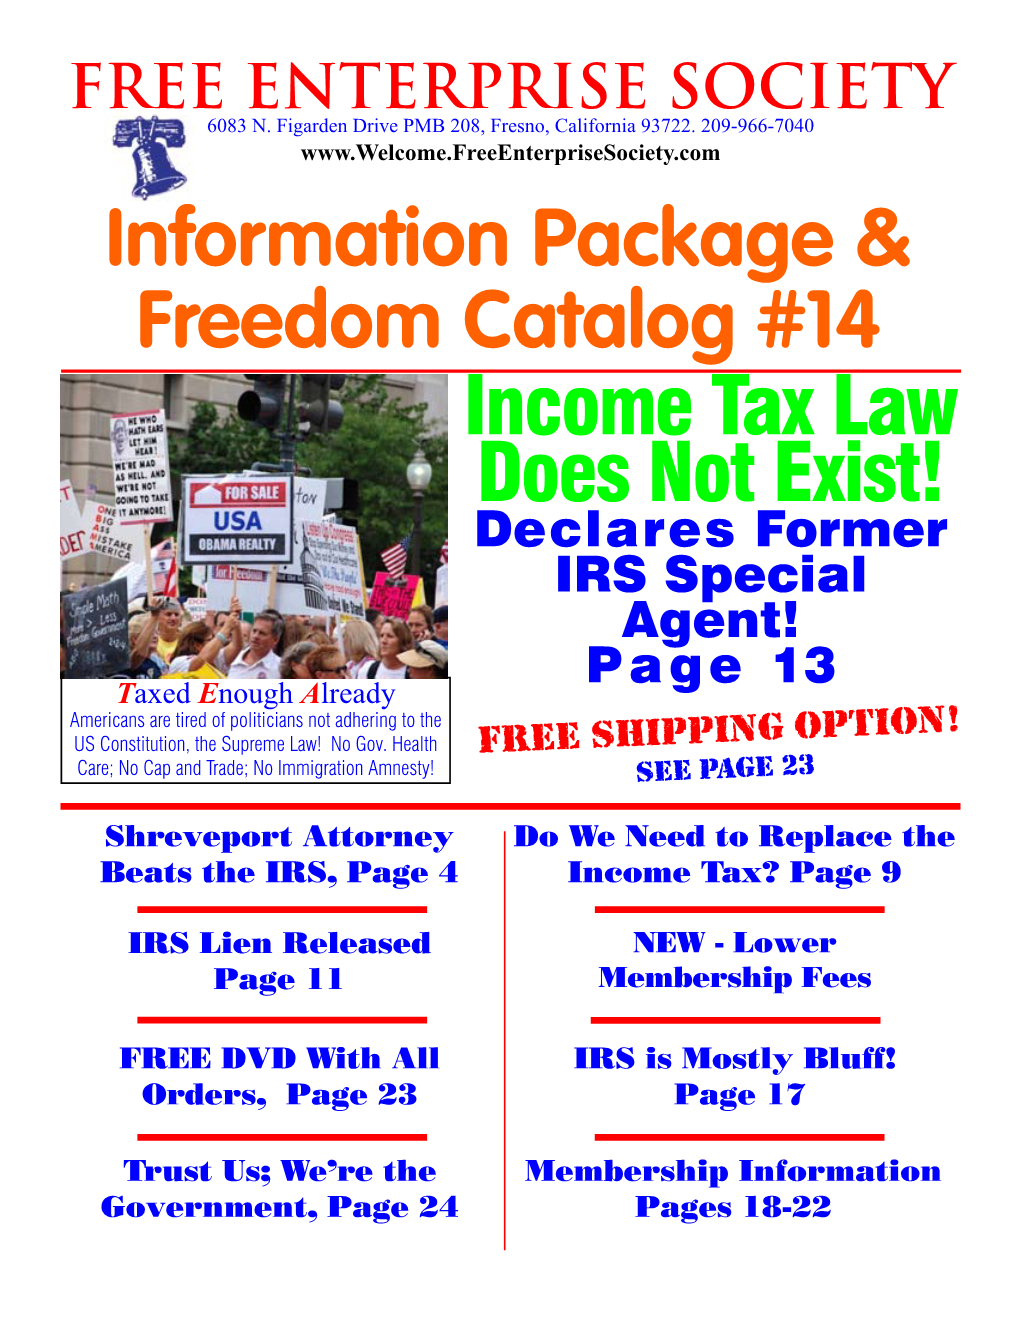 Information Package & Freedom Catalog #14 Income Tax Law Does